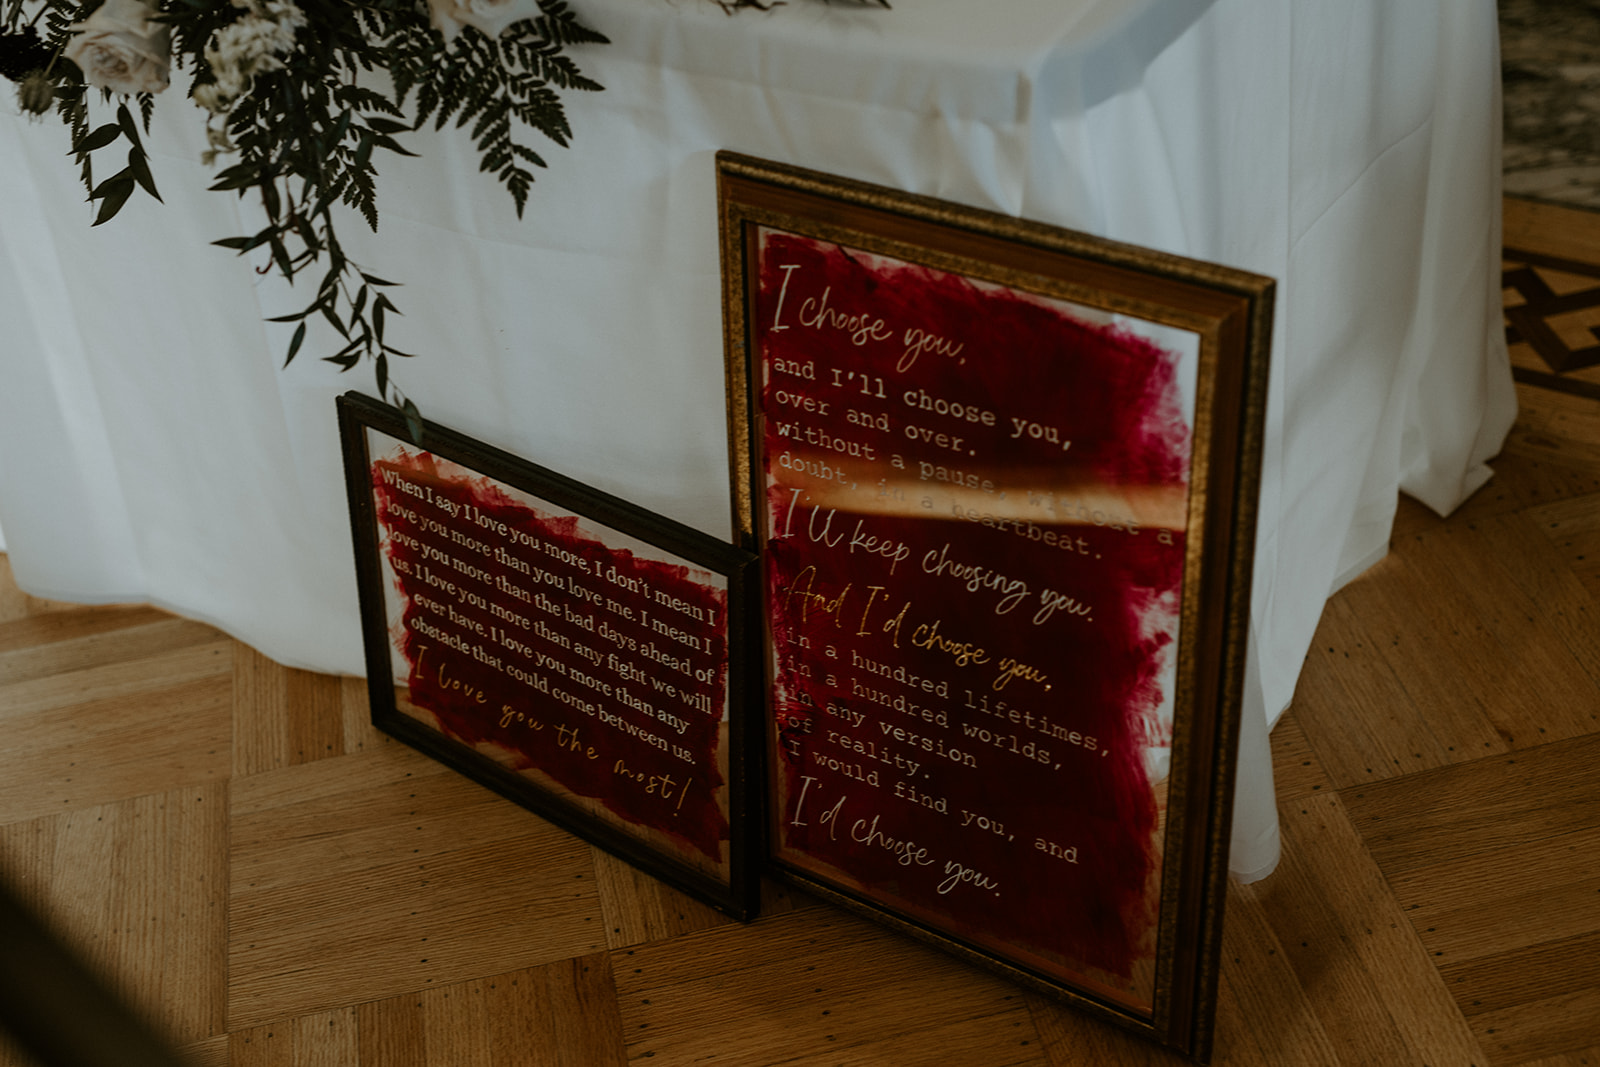 Wedding Details at Cecil Green Park House